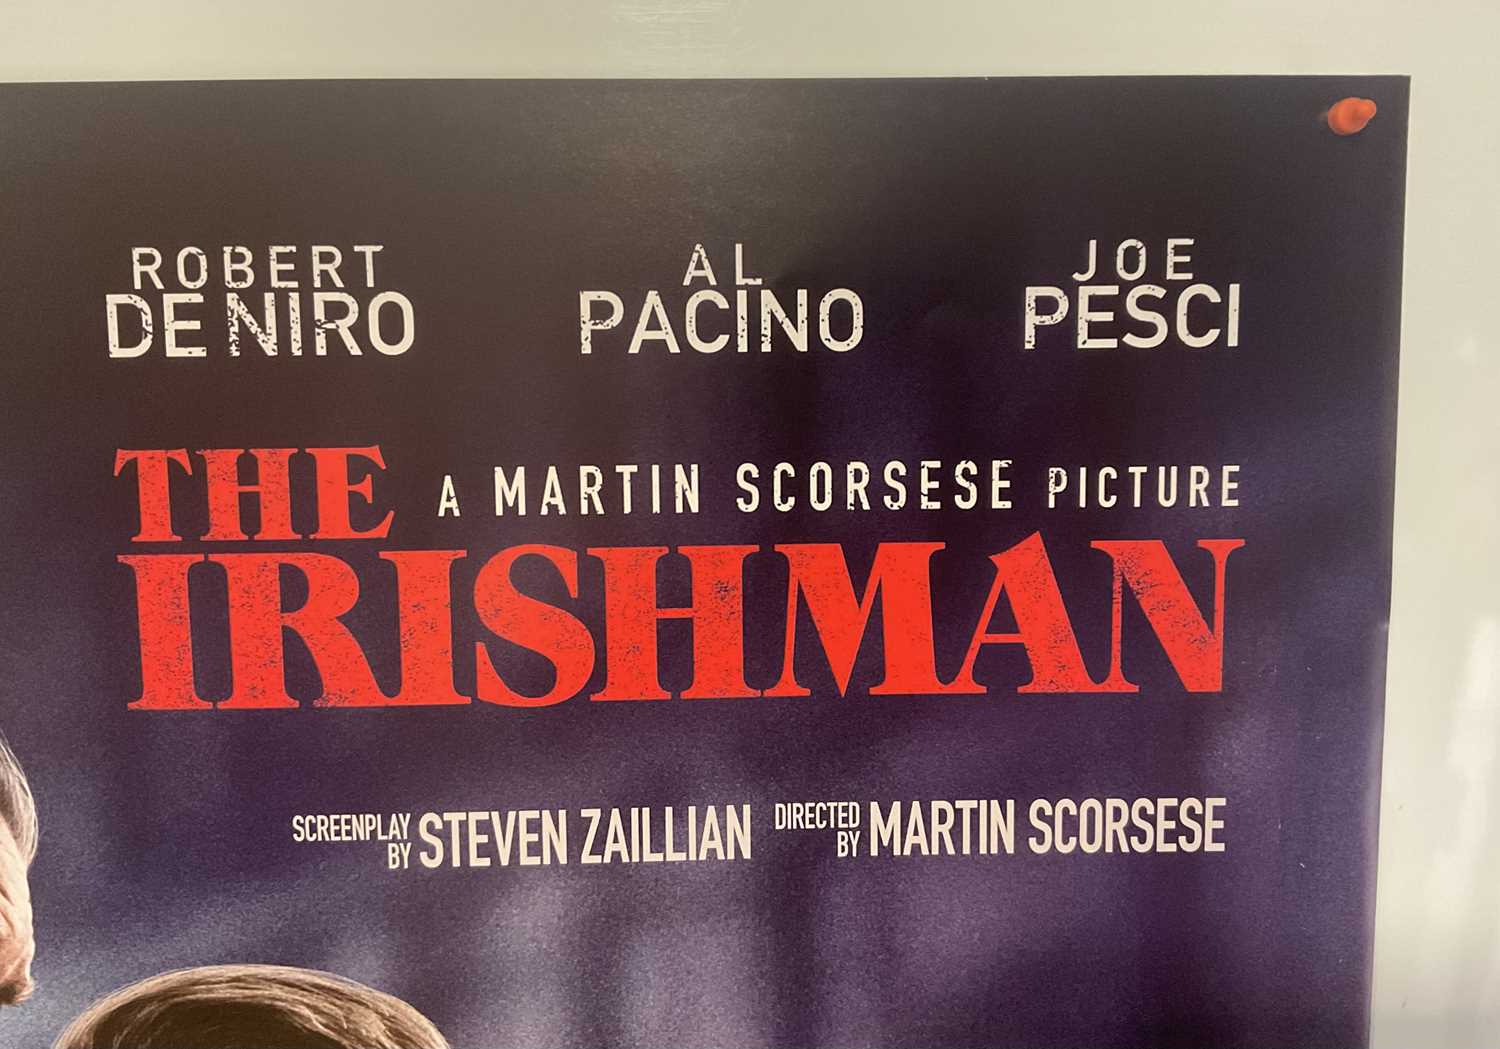 THE IRISHMAN (2019) UK Quad film poster, extremely scarce due to a very limited theatrical release - Image 4 of 7